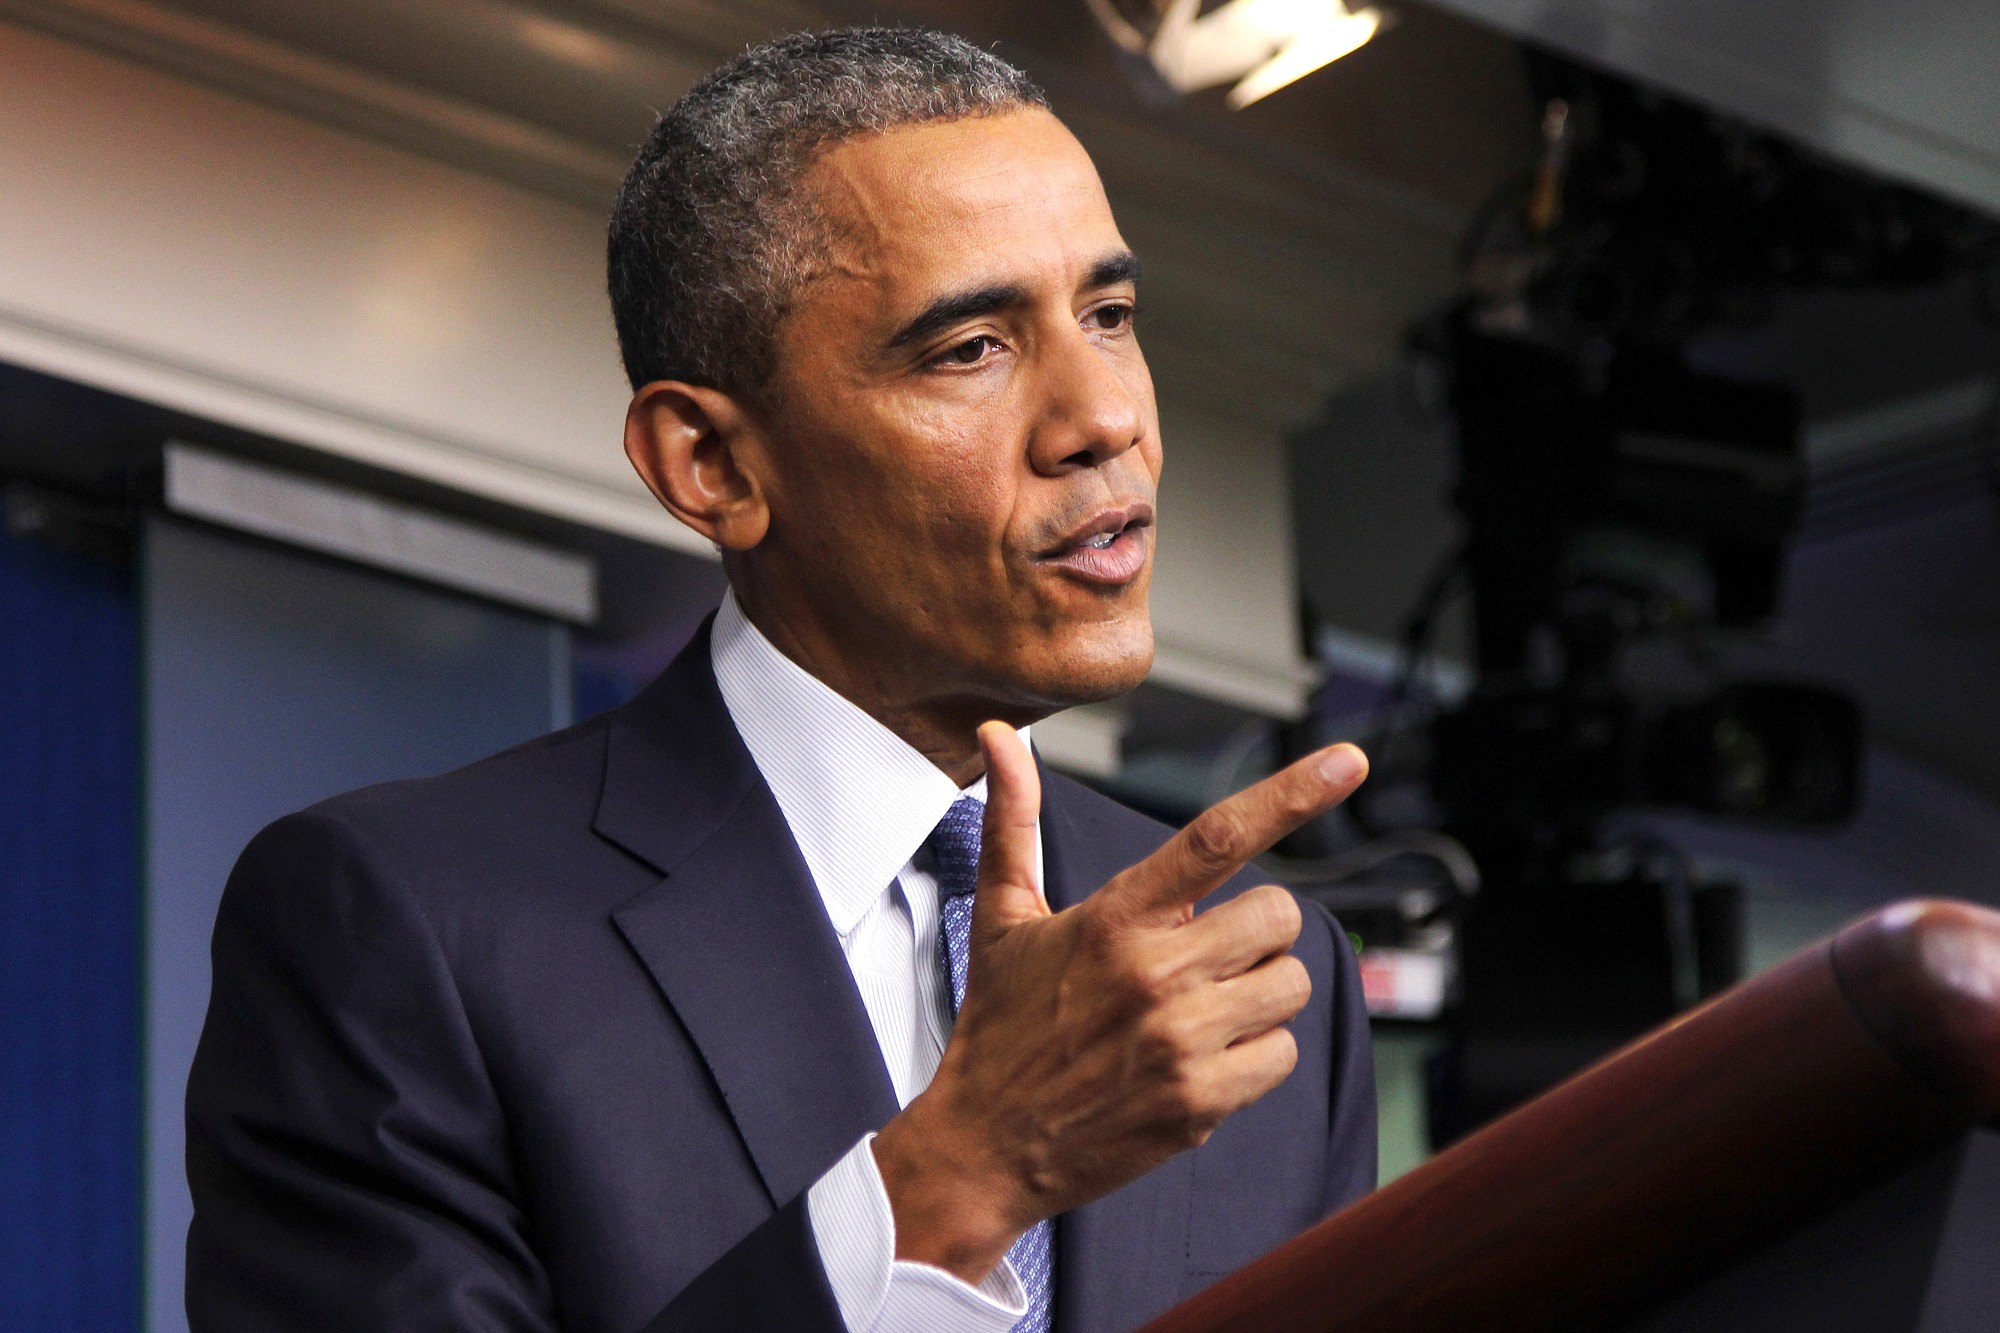 President Barack Obama speaks in the Brady Press Briefing Room of the White House in Washington, Friday, Aug. 1, 2014. The president spoke on various topics including the economy, immigration, Ukraine and the Middle East.